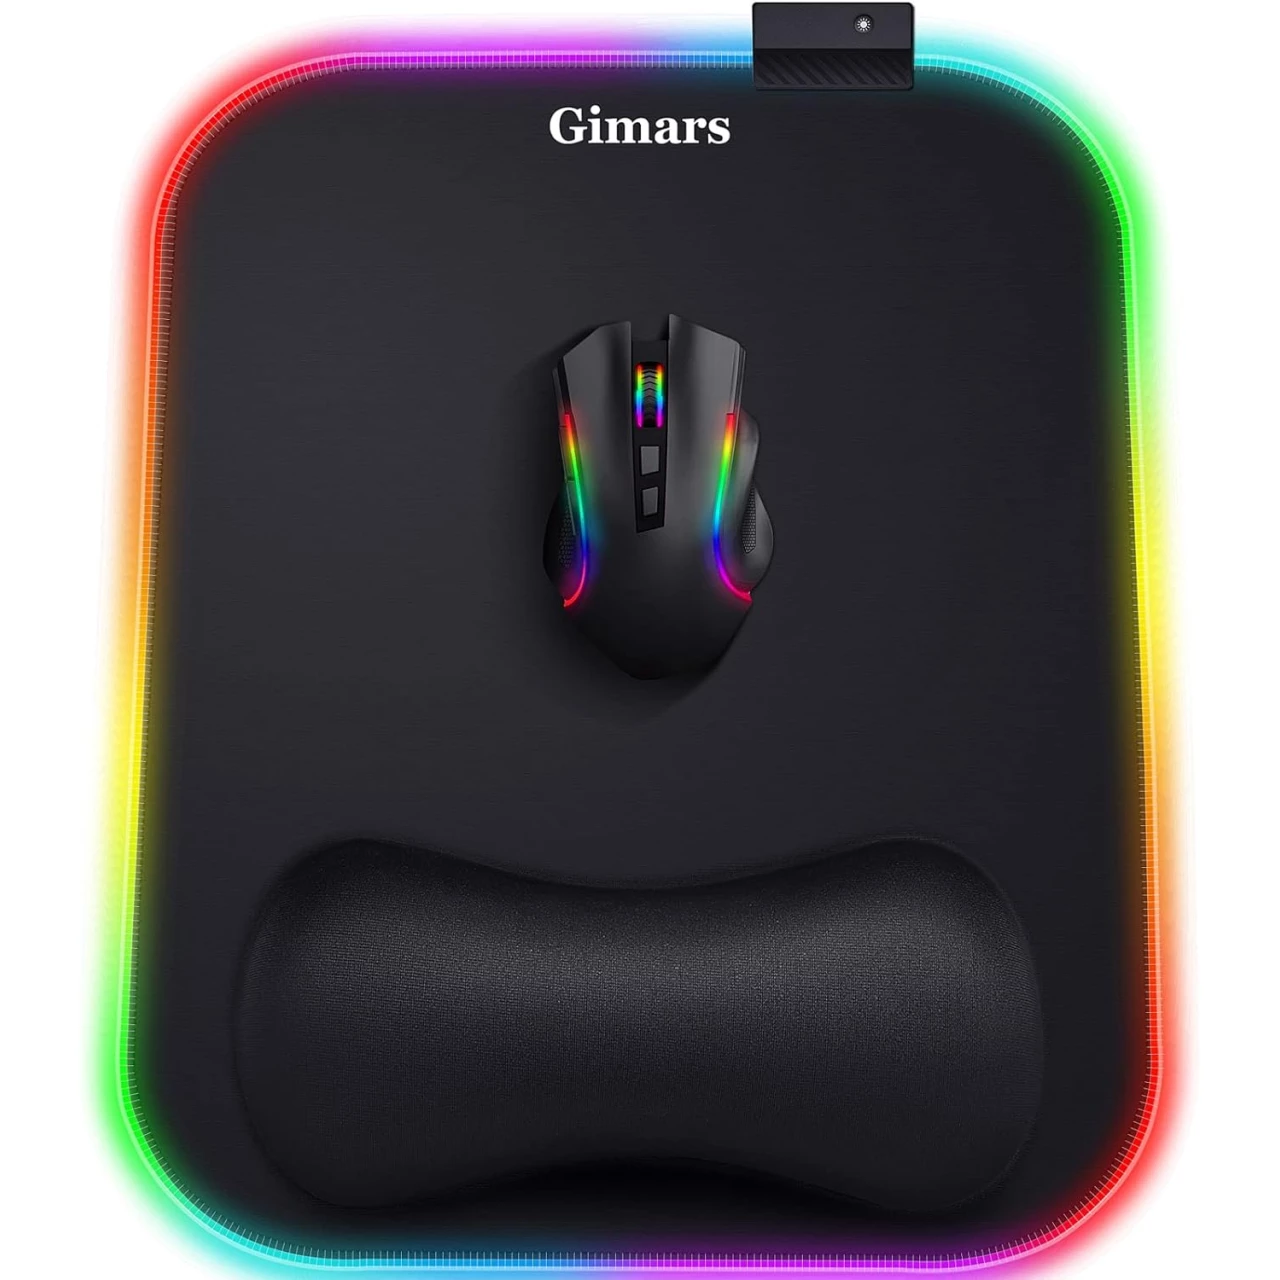 Gimars RGB Mouse Pad with Wrist Rest Support,12 x 10 inch Extra Large Ergonomic Gaming Mouse Pad with 11 LED Lighting Modes,Non-Slip Rubber Base,Lycra Fabric for Laptop, Computer, PC Gaming